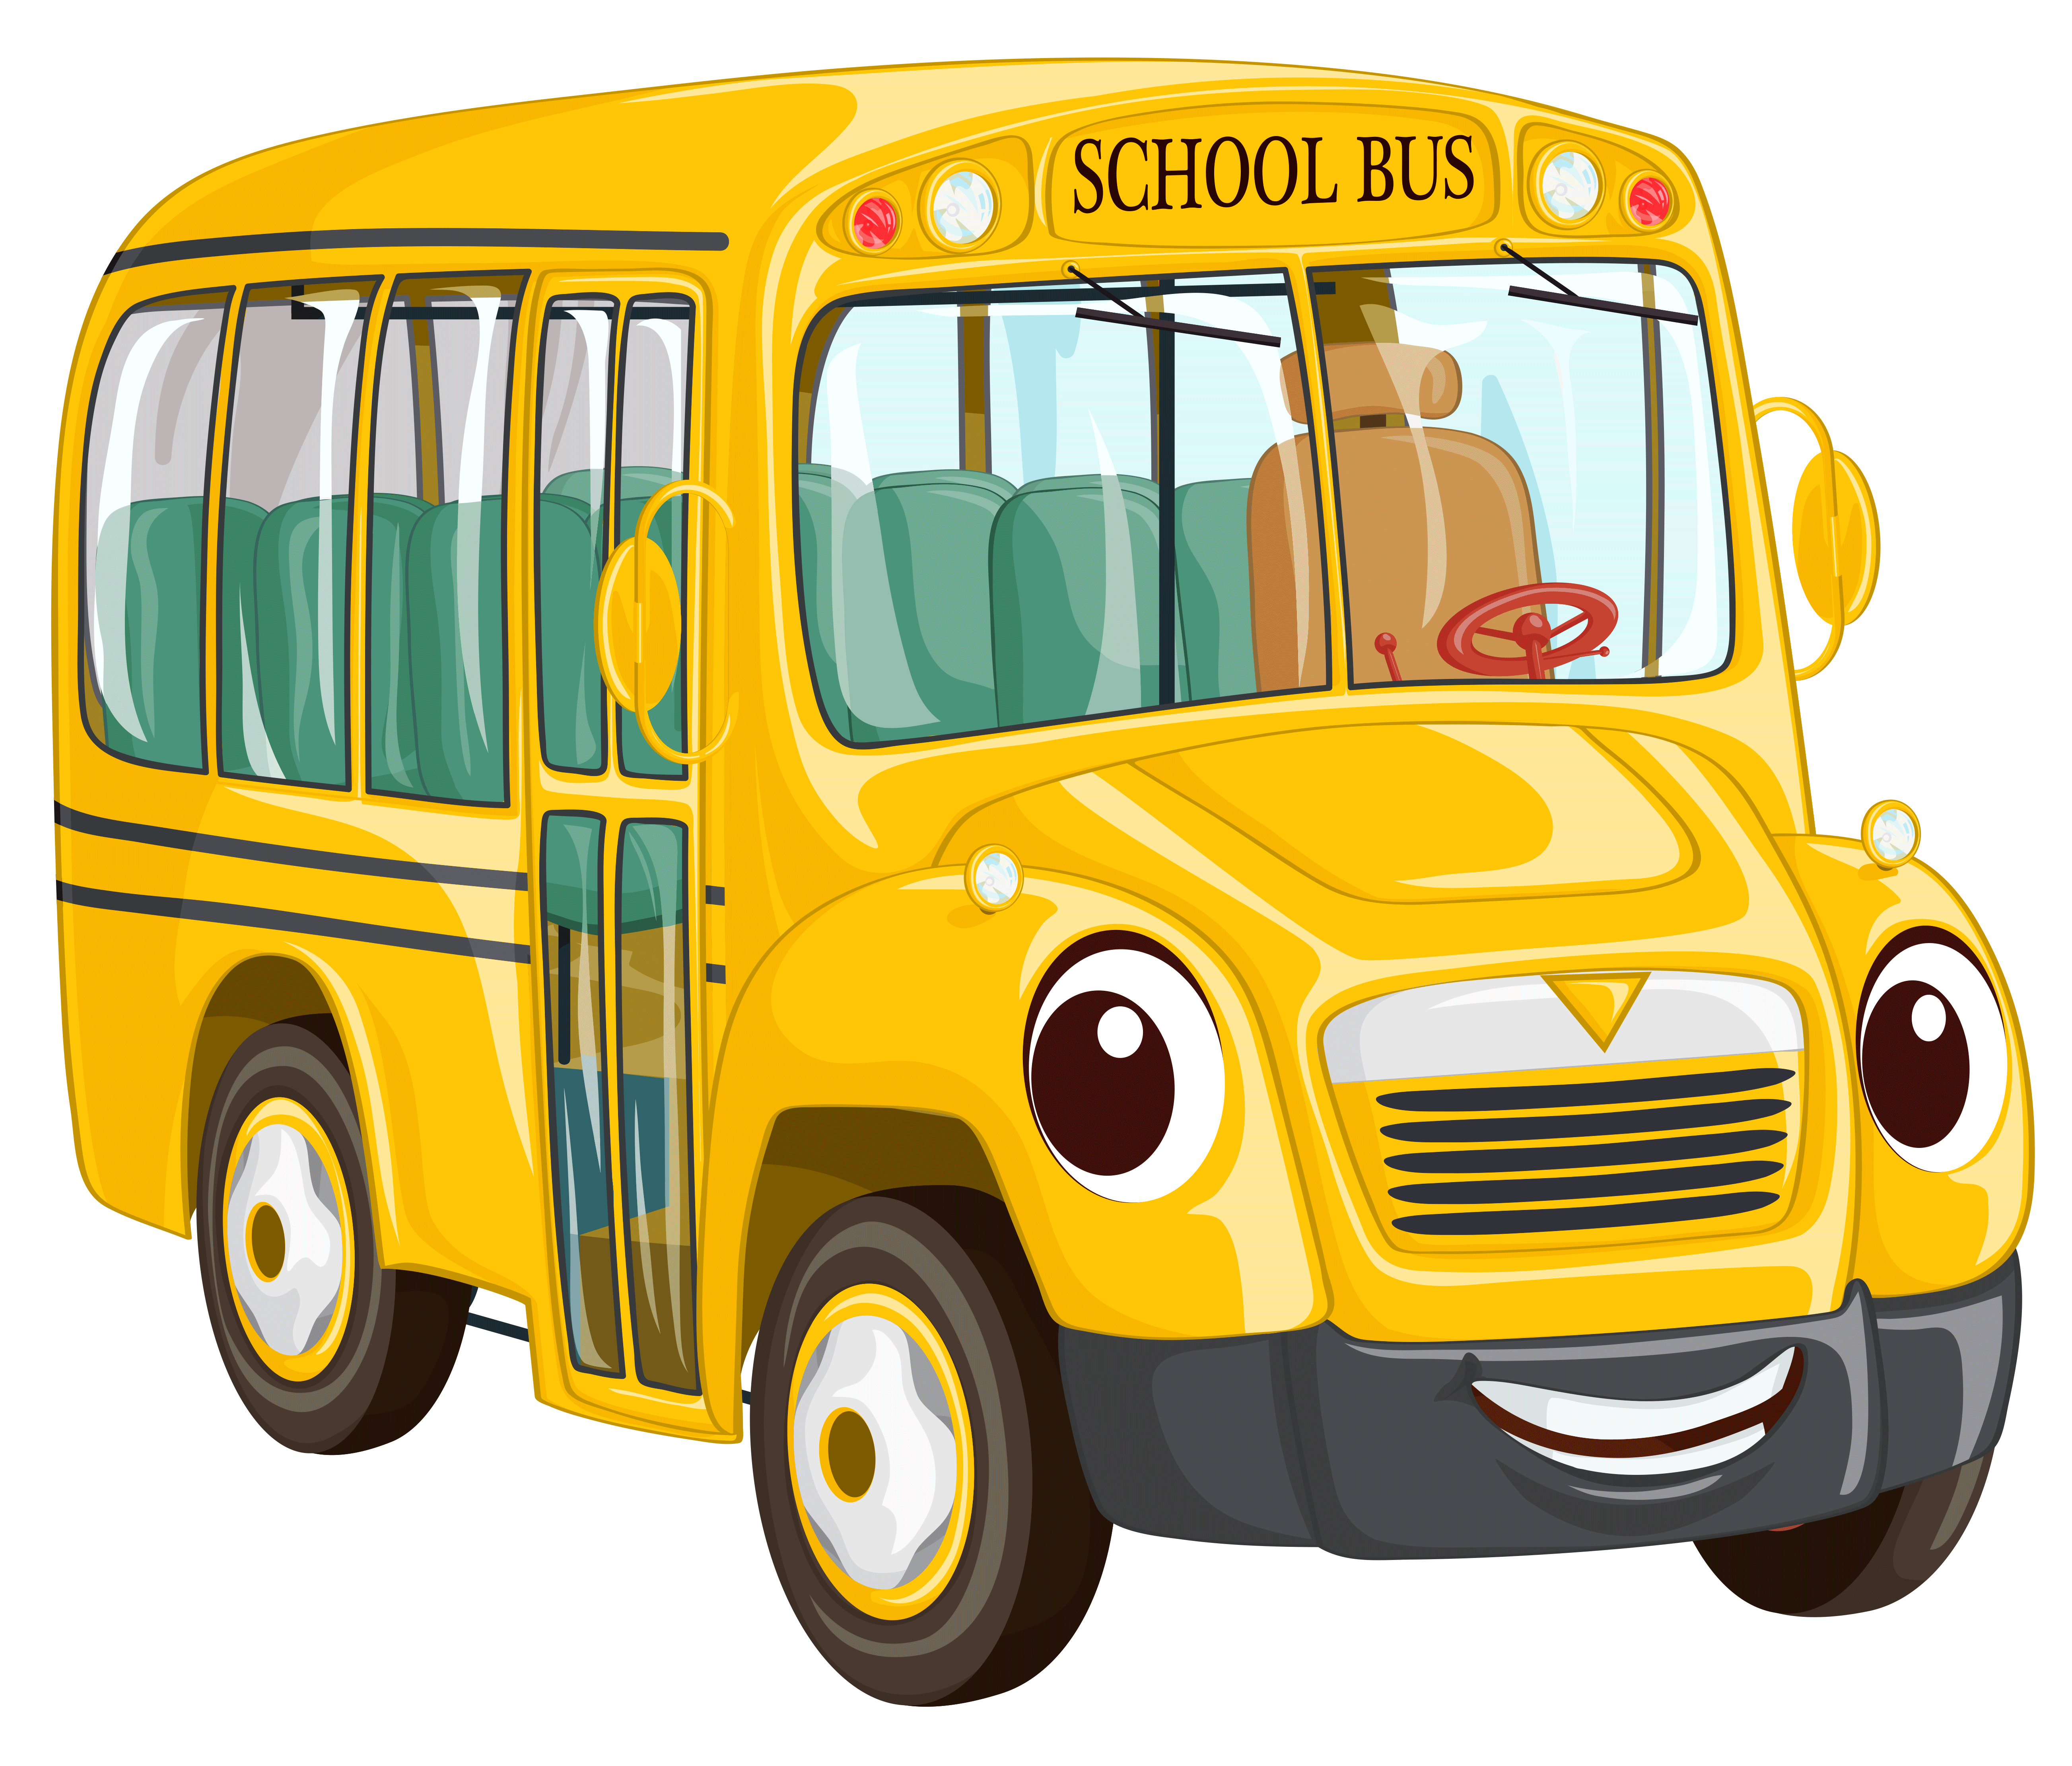 School Bus PNG Clipart - Download free Car images in PNG